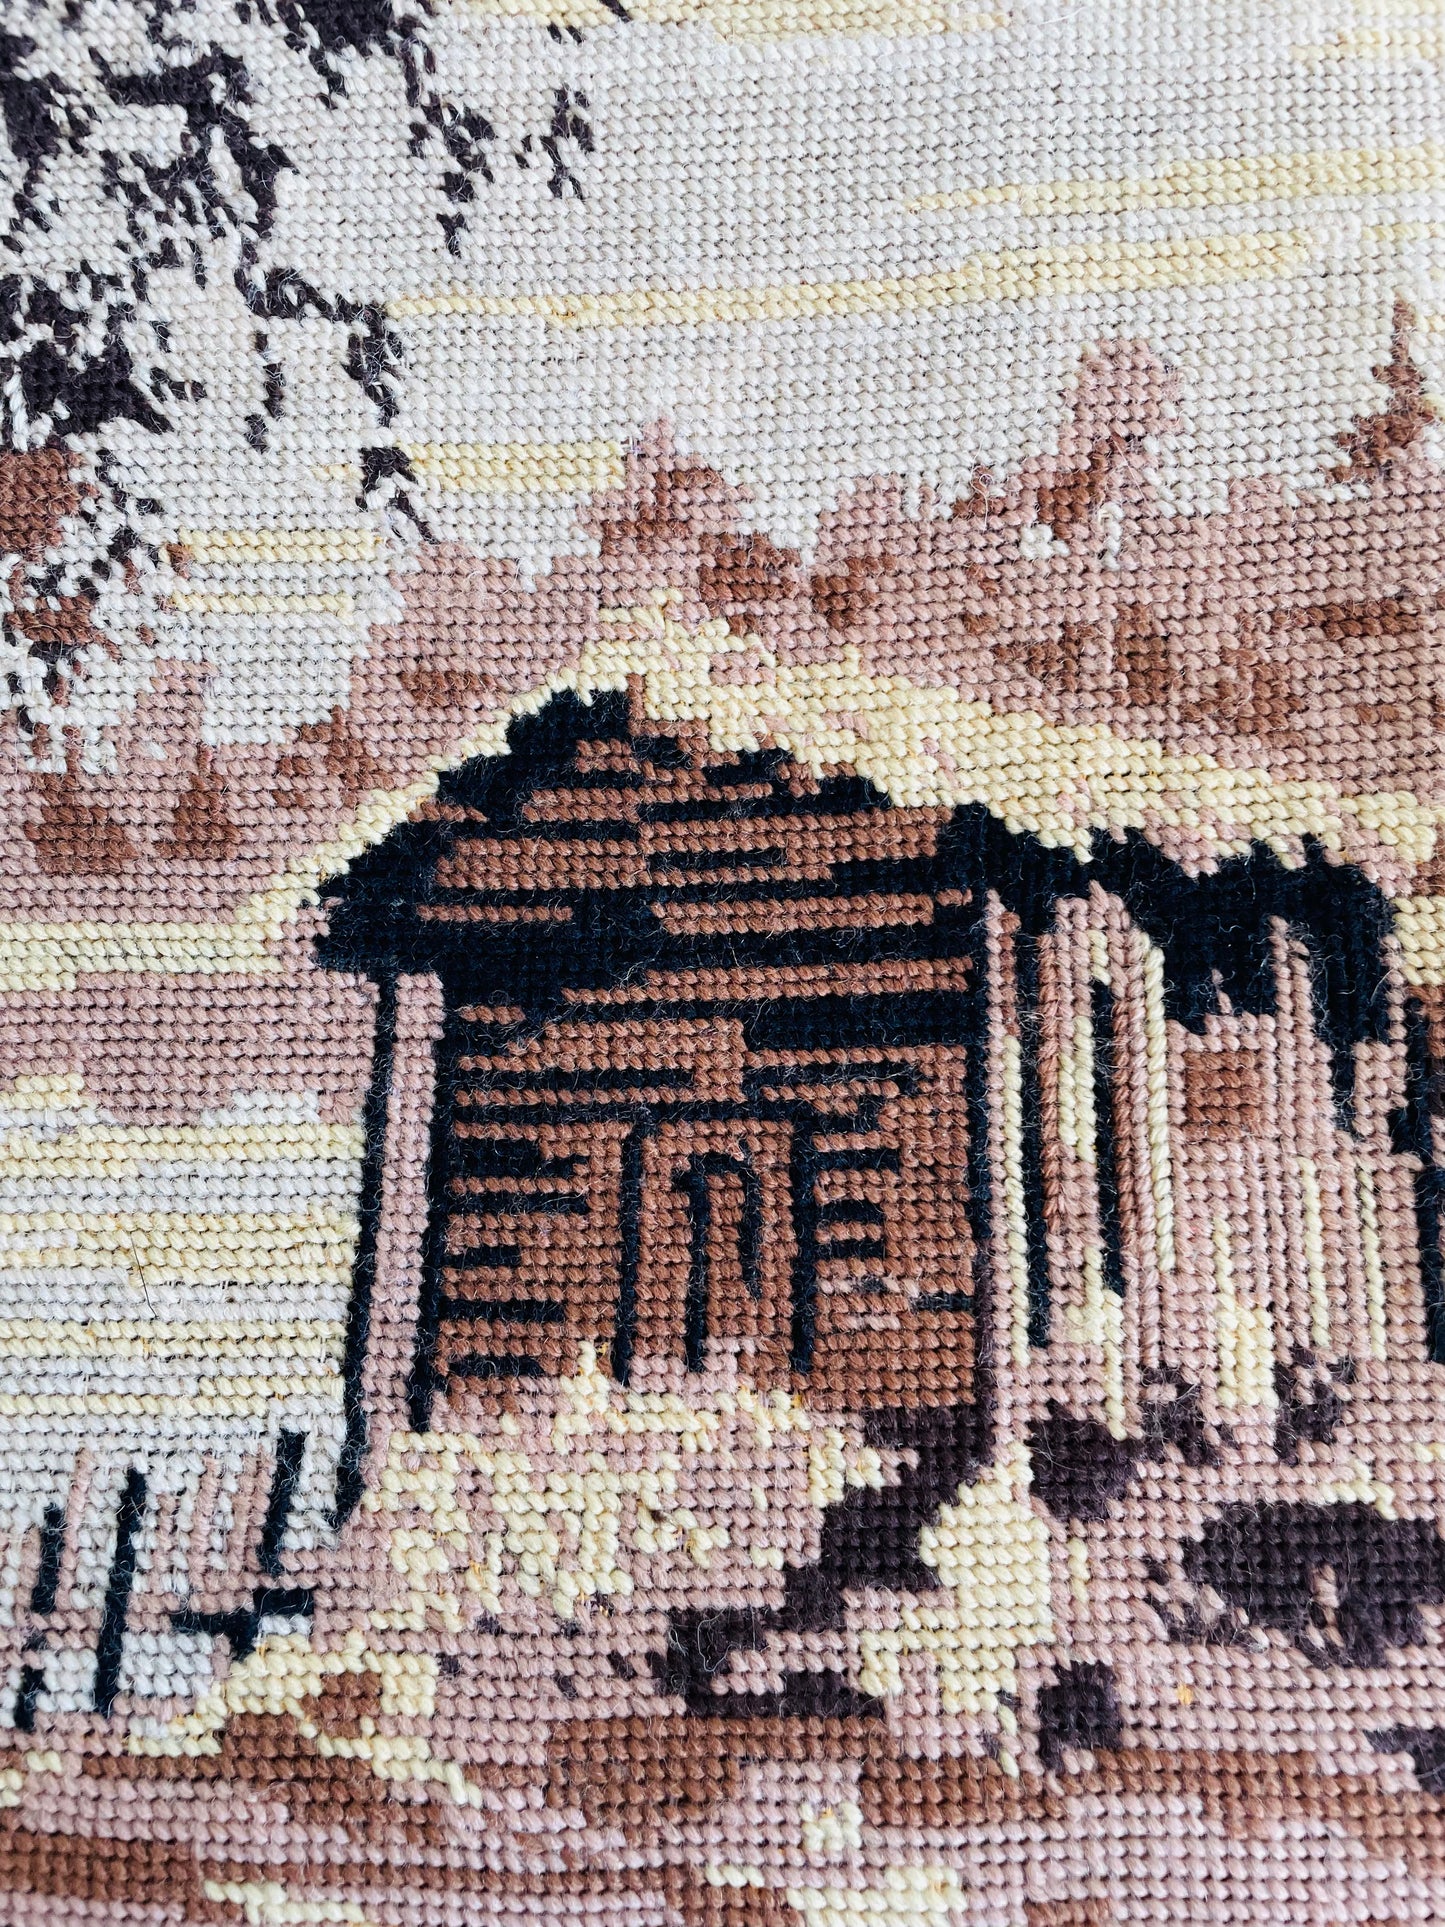 Log Cabin Needlepoint Embroidery